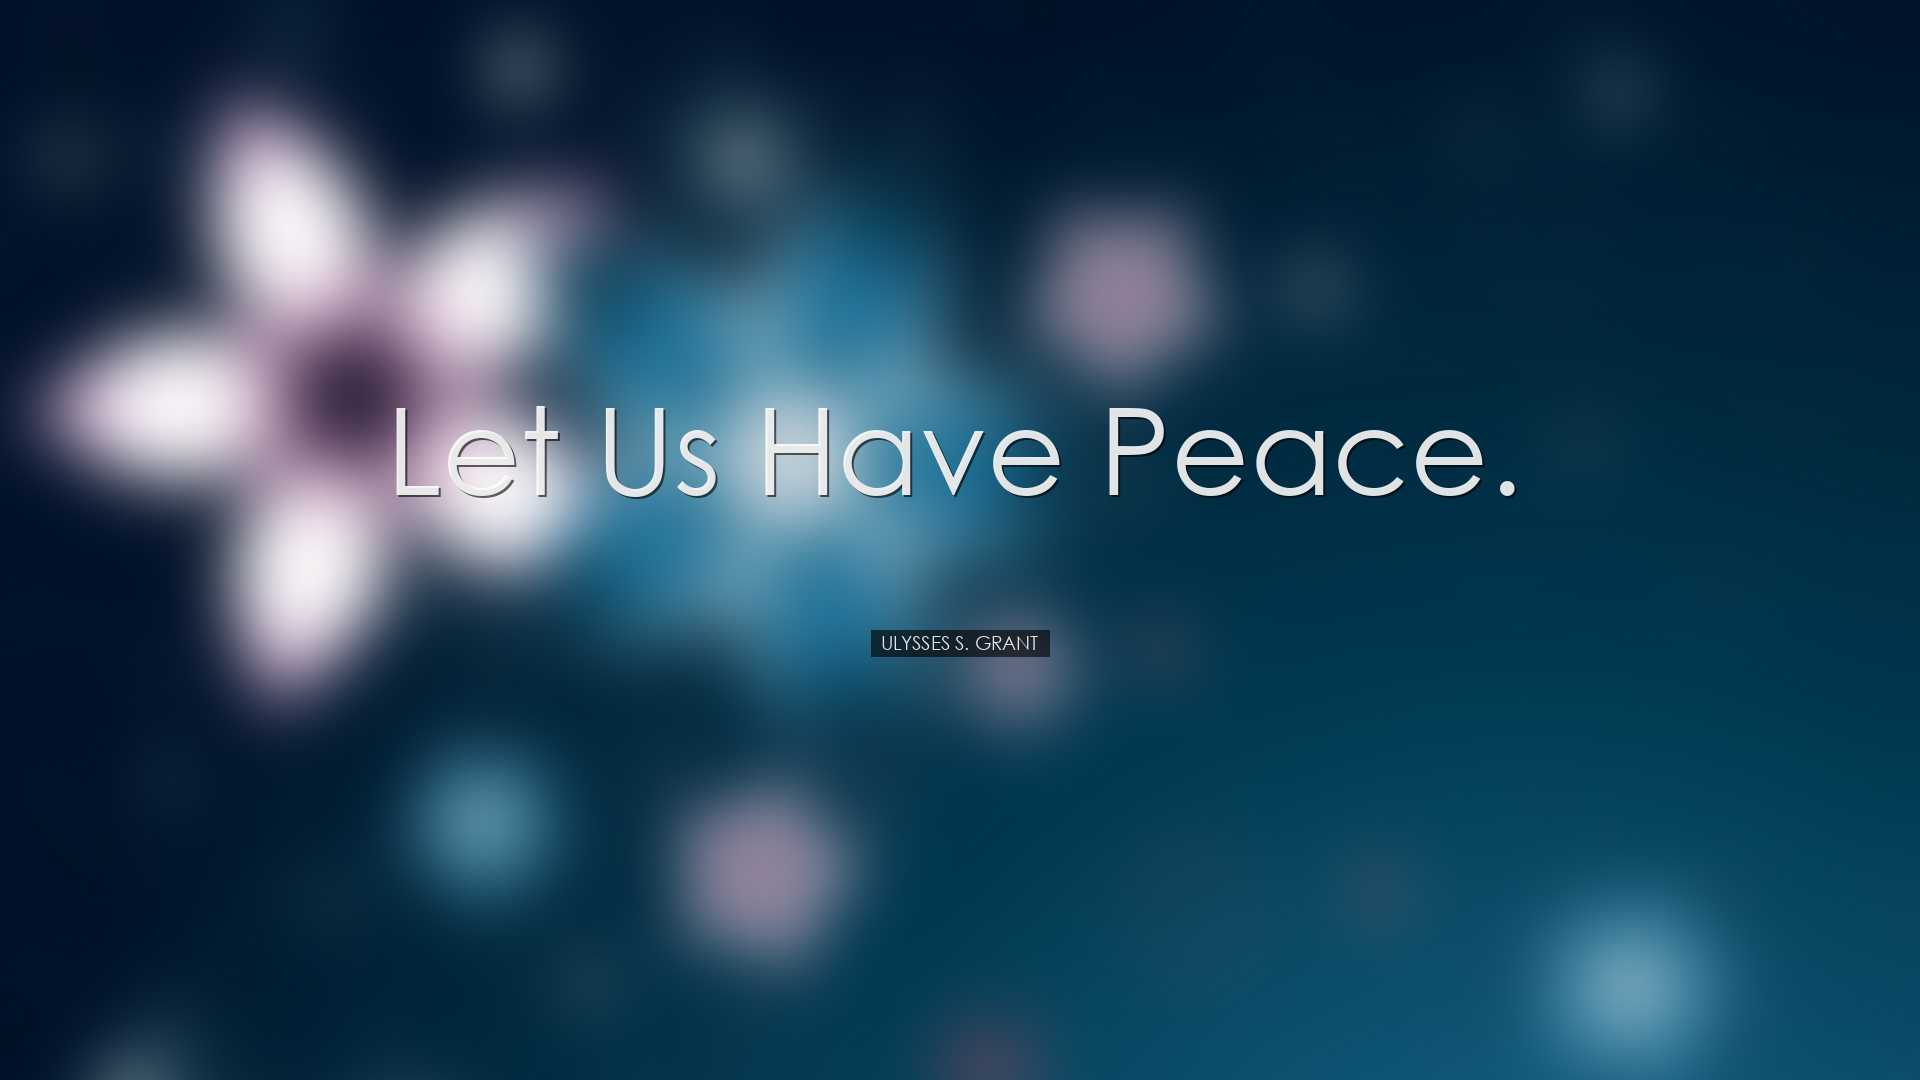 Let us have peace. - Ulysses S. Grant